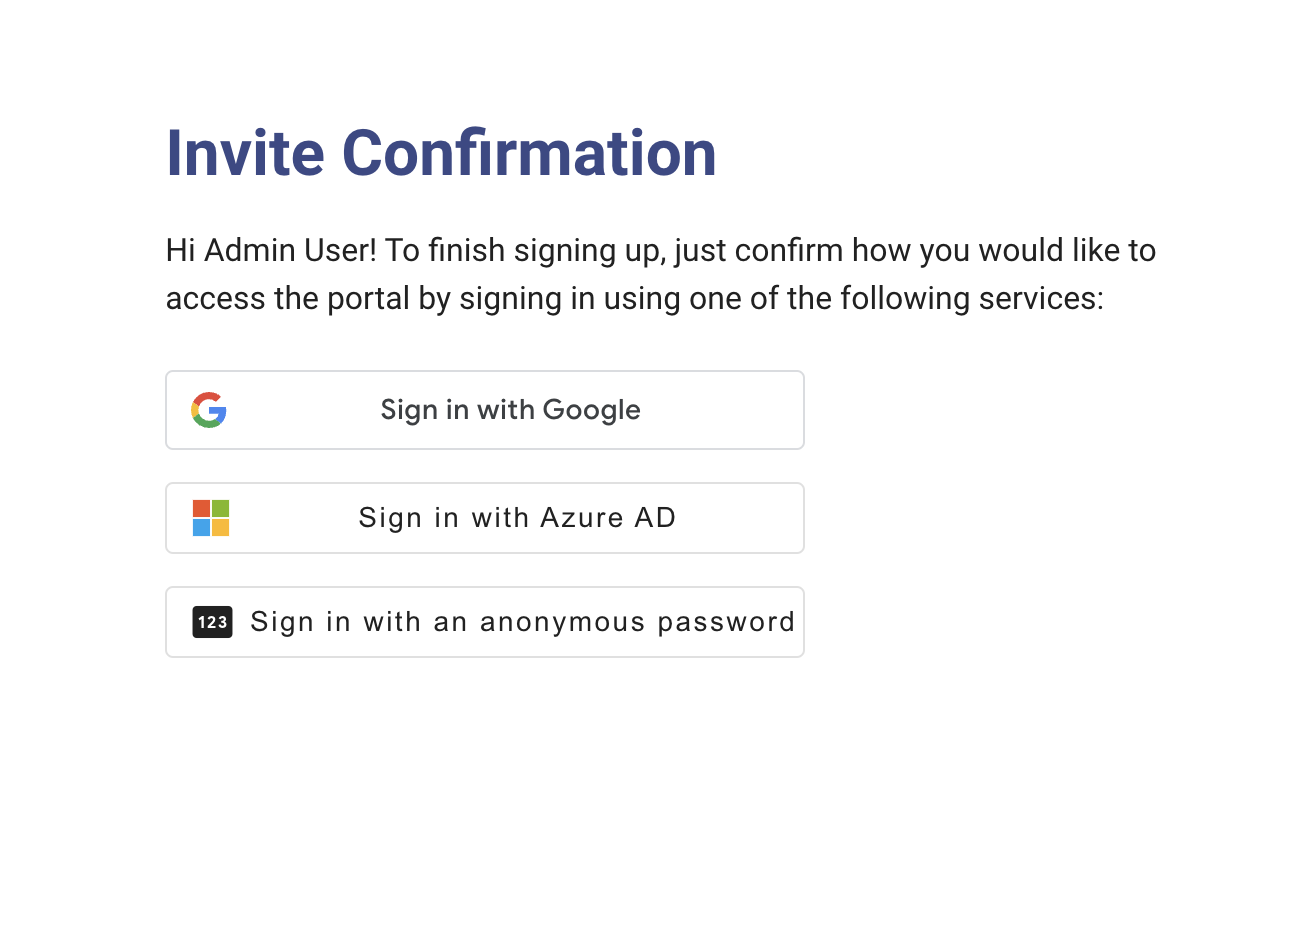 Authentication provider selection screen with options: Google and Azure AD